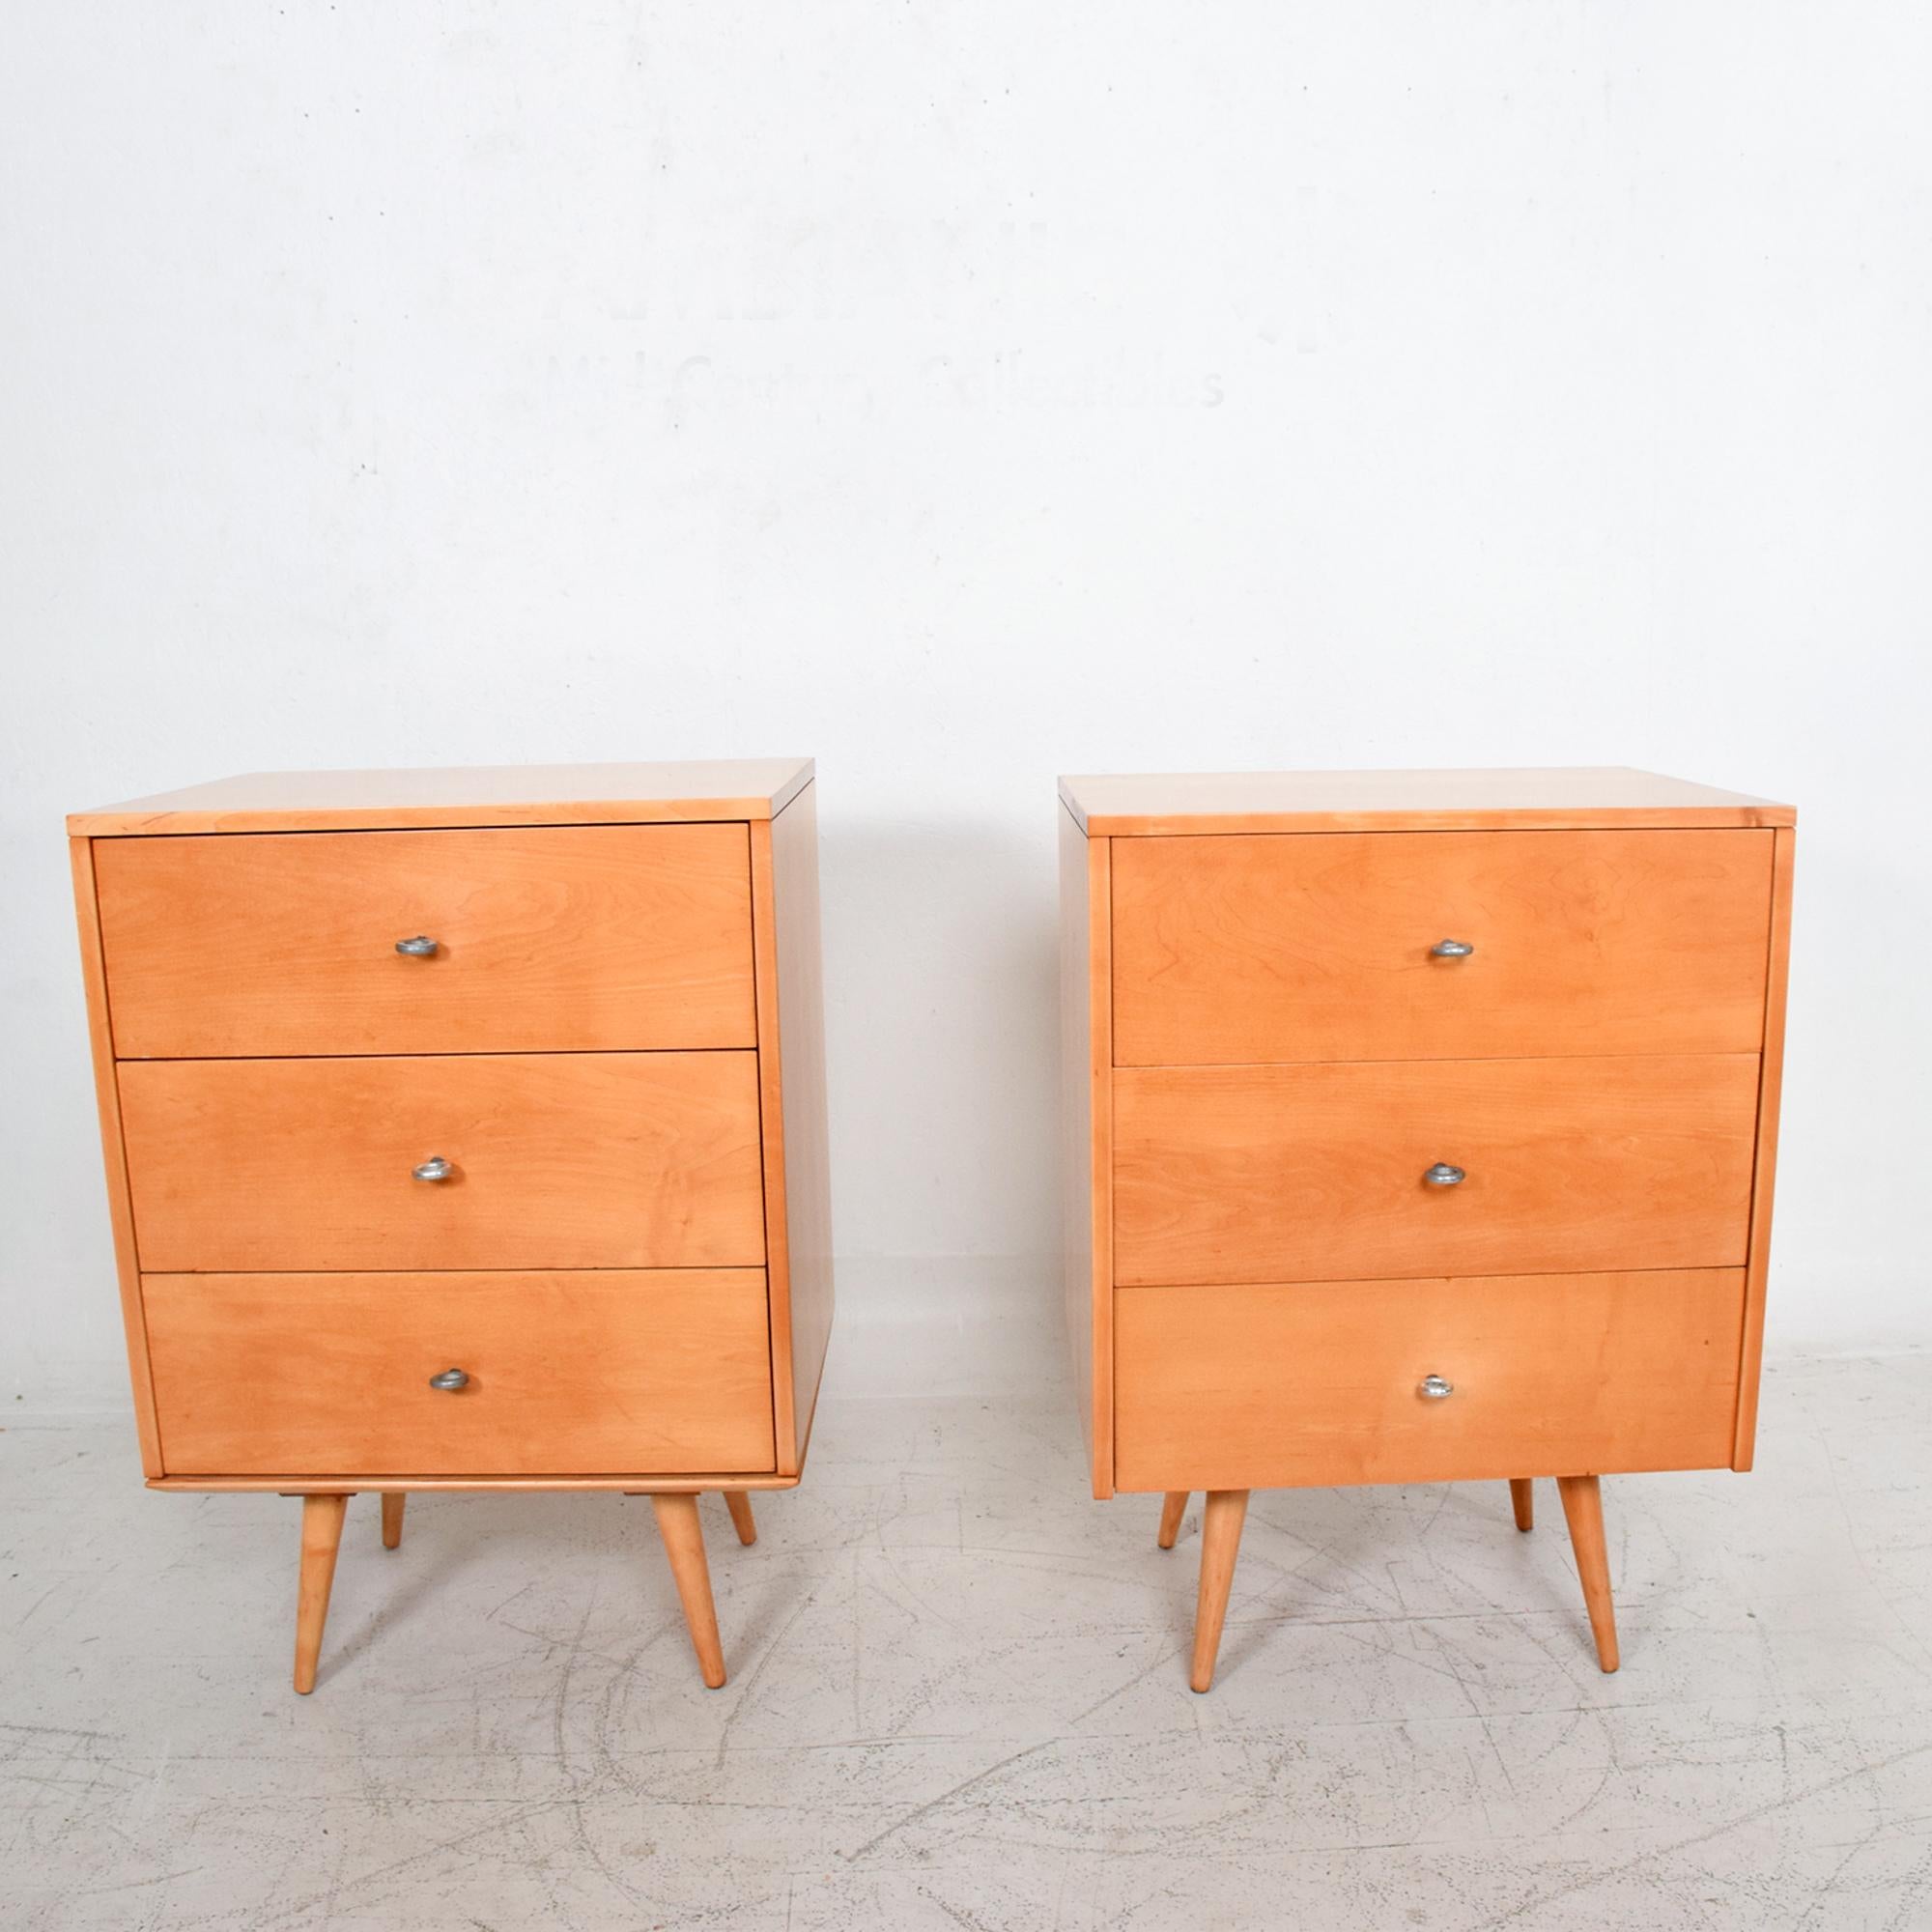 For your consideration: Paul McCobb maple wood lacquered dressers by Planner Group Designs, USA, 1950s Winchendon Furniture.
Single dressers made in solid maple wood with lacquer finish. McCobb classic aluminum ring pulls. All drawers function